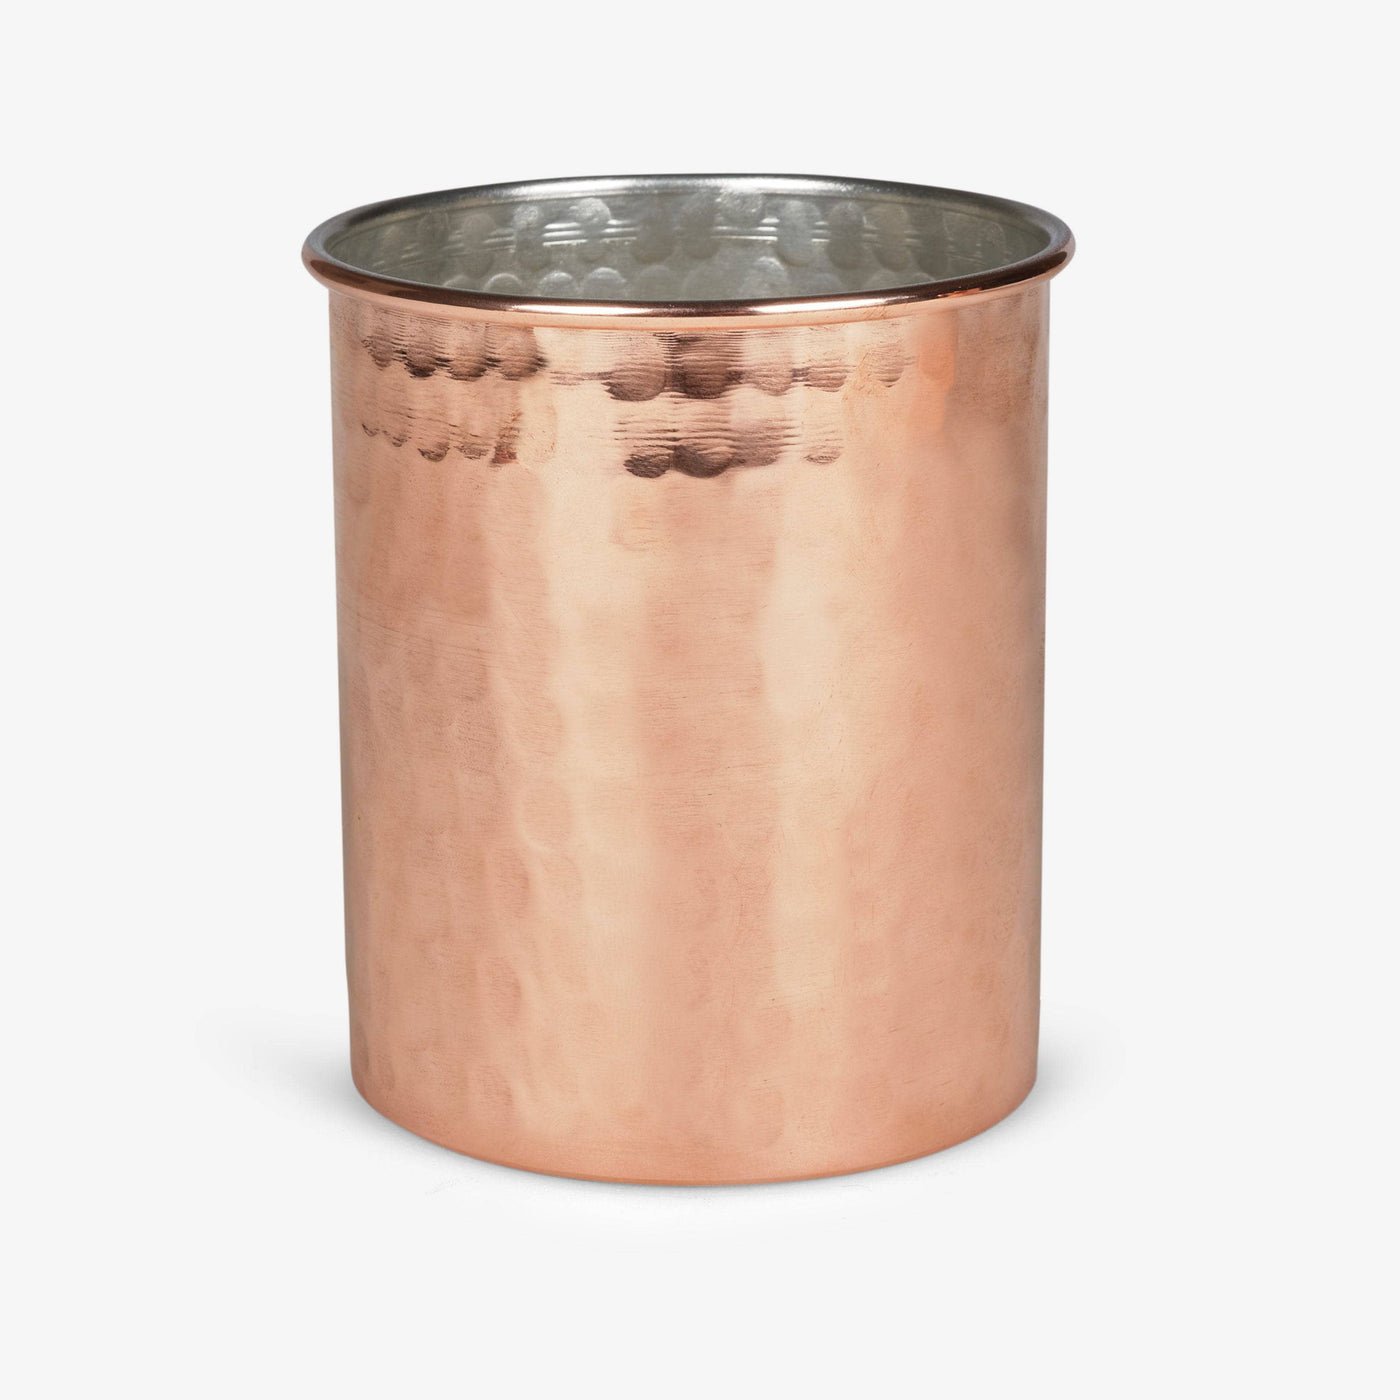 Penny Hammered Copper Spice Jar, Copper, 8.5x8.5x12.5 cm 2